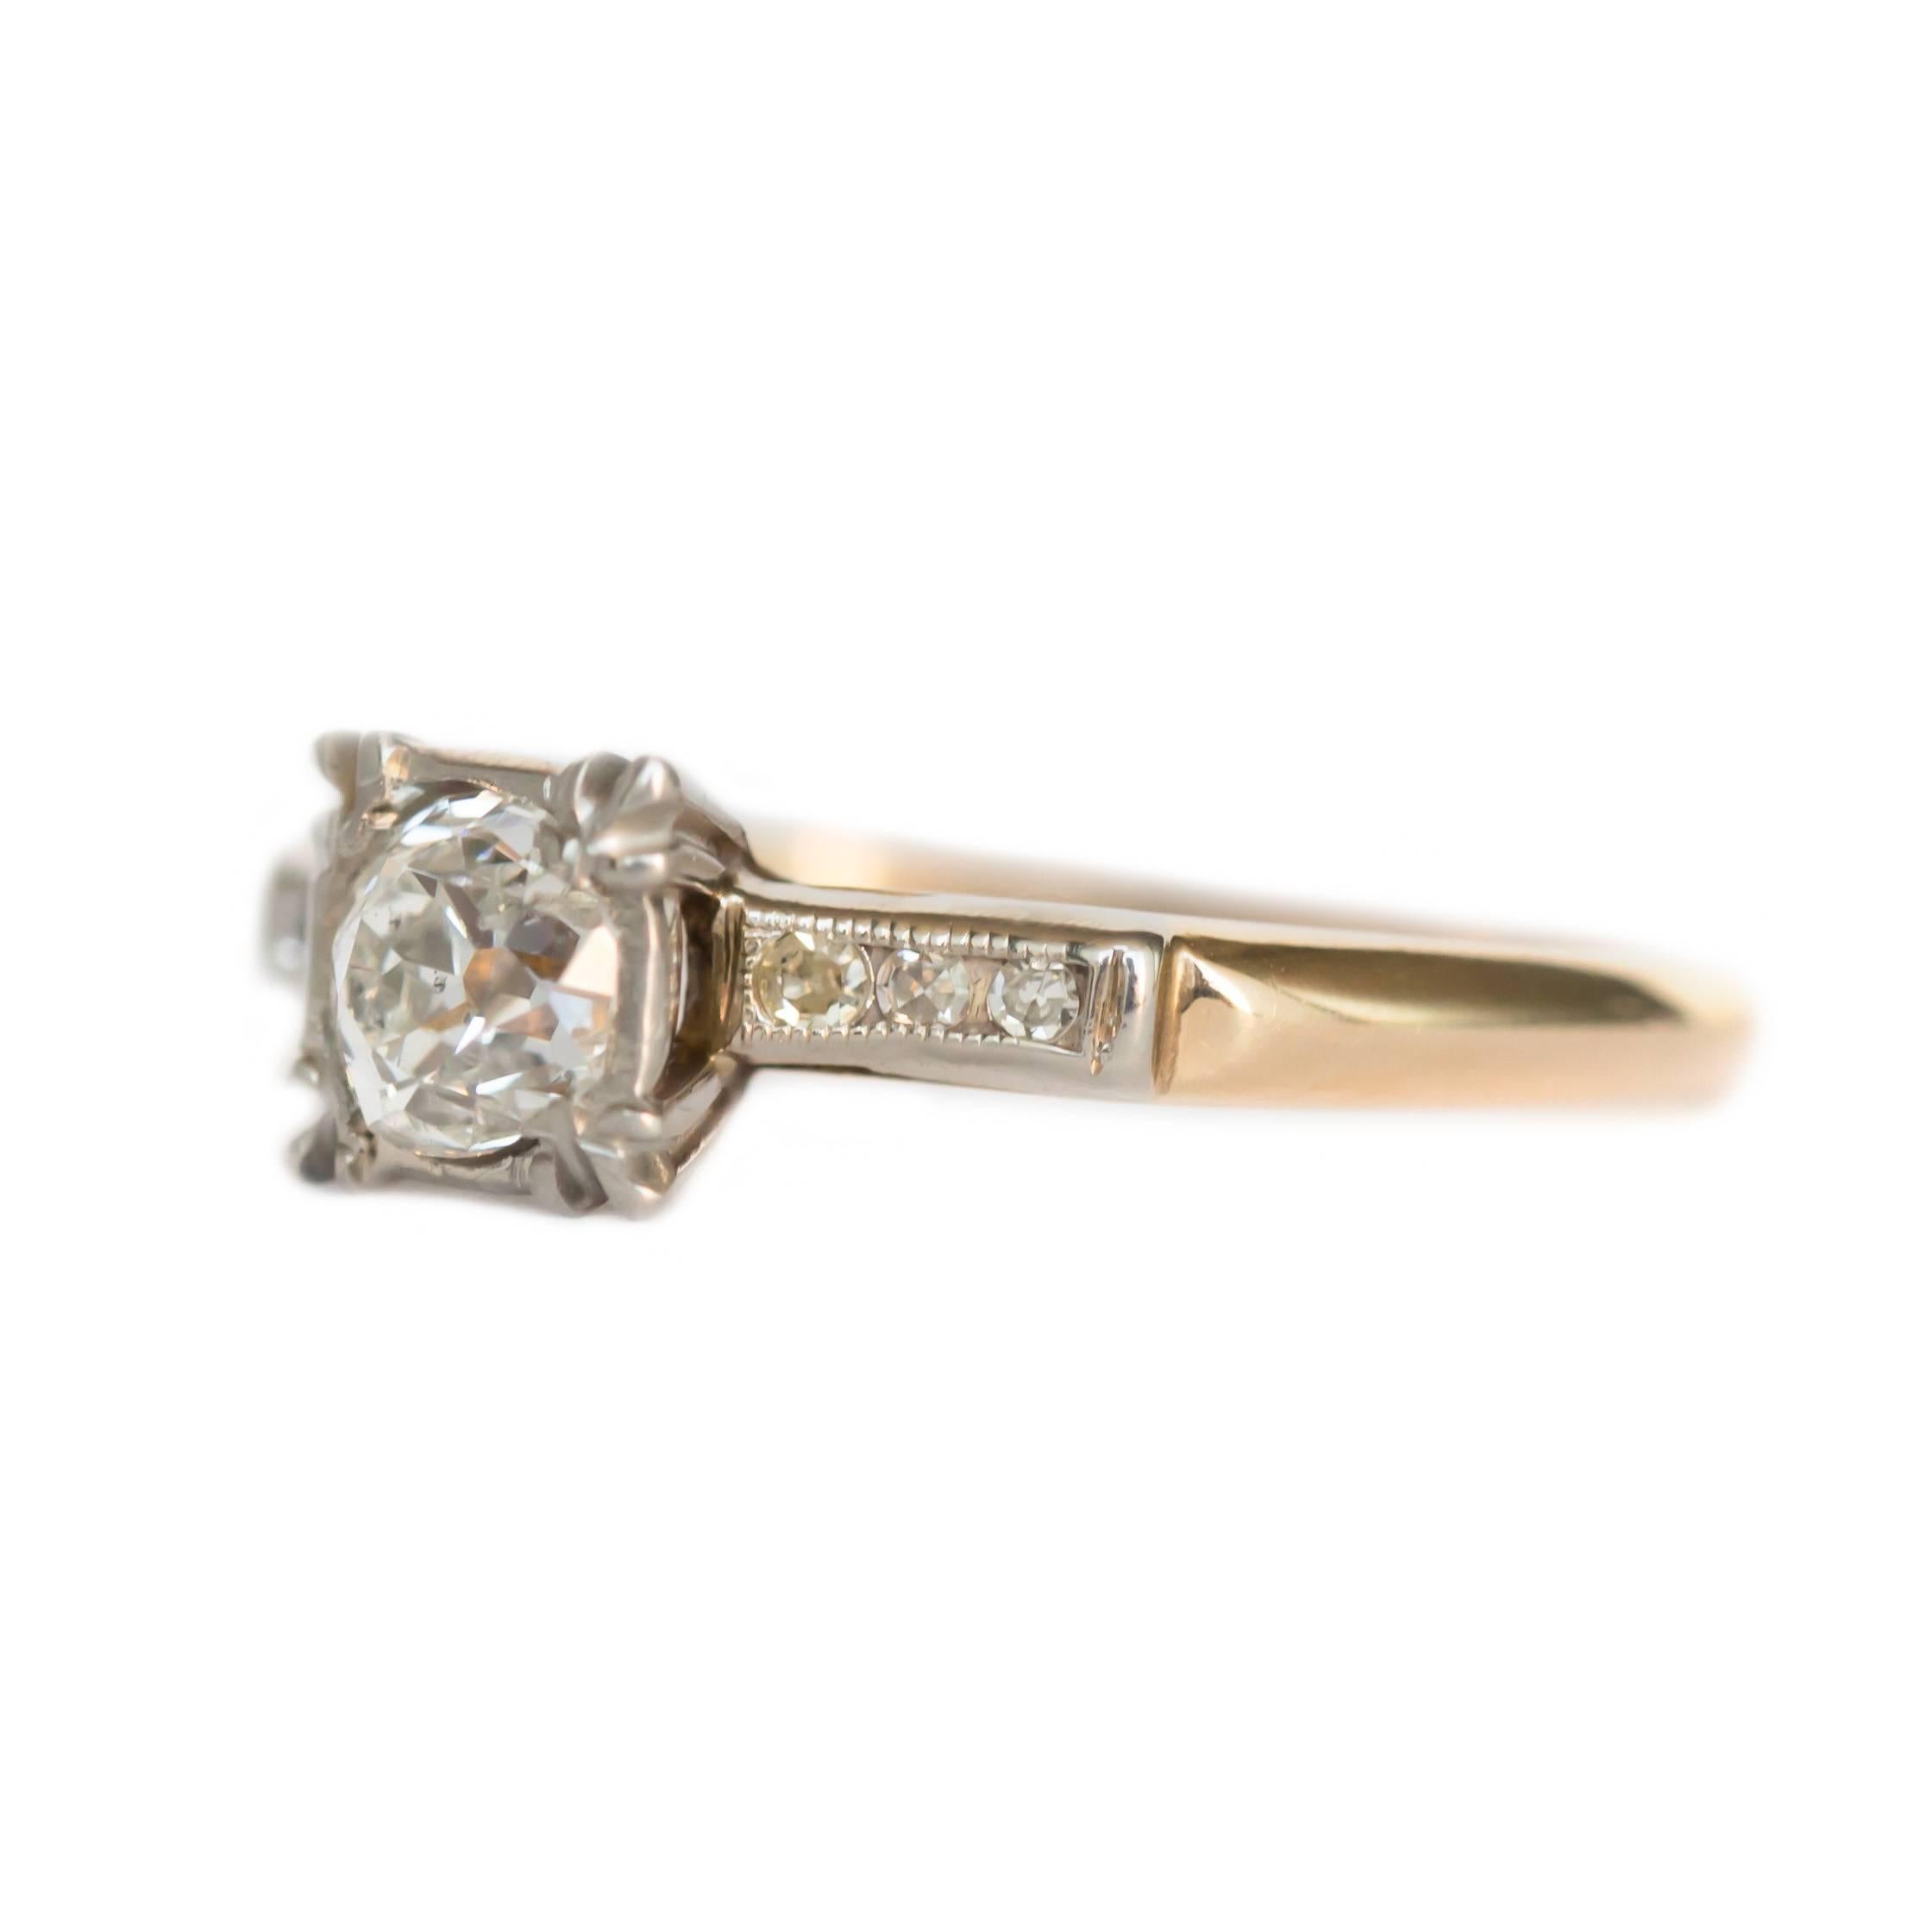 Item Details: 
Ring Size: 7
Metal Type: 14 Karat Yellow Gold
Weight: 2.3 grams

Center Diamond Details
GIA CERTIFIED Center Diamond - Certificate # [2181880138 ]
Shape: Old Mine Brilliant
Carat Weight: 0.58 carat
Color: I
Clarity: SI2

Side Stone